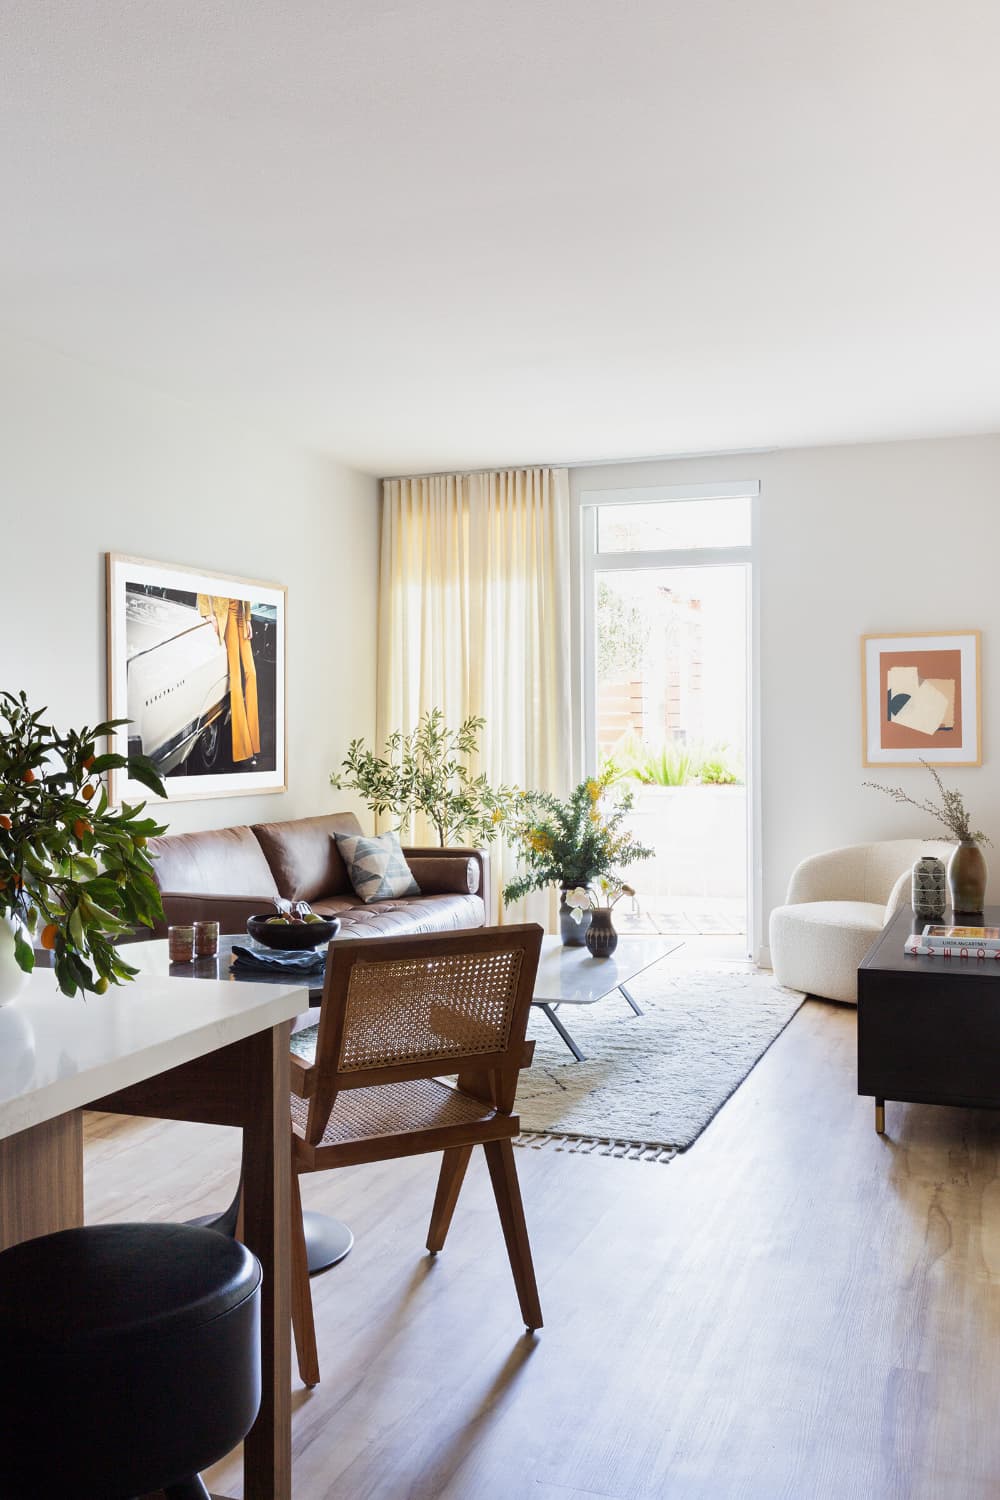 this is a serene living room with mid century and japandi elements designed by Stefani Stein